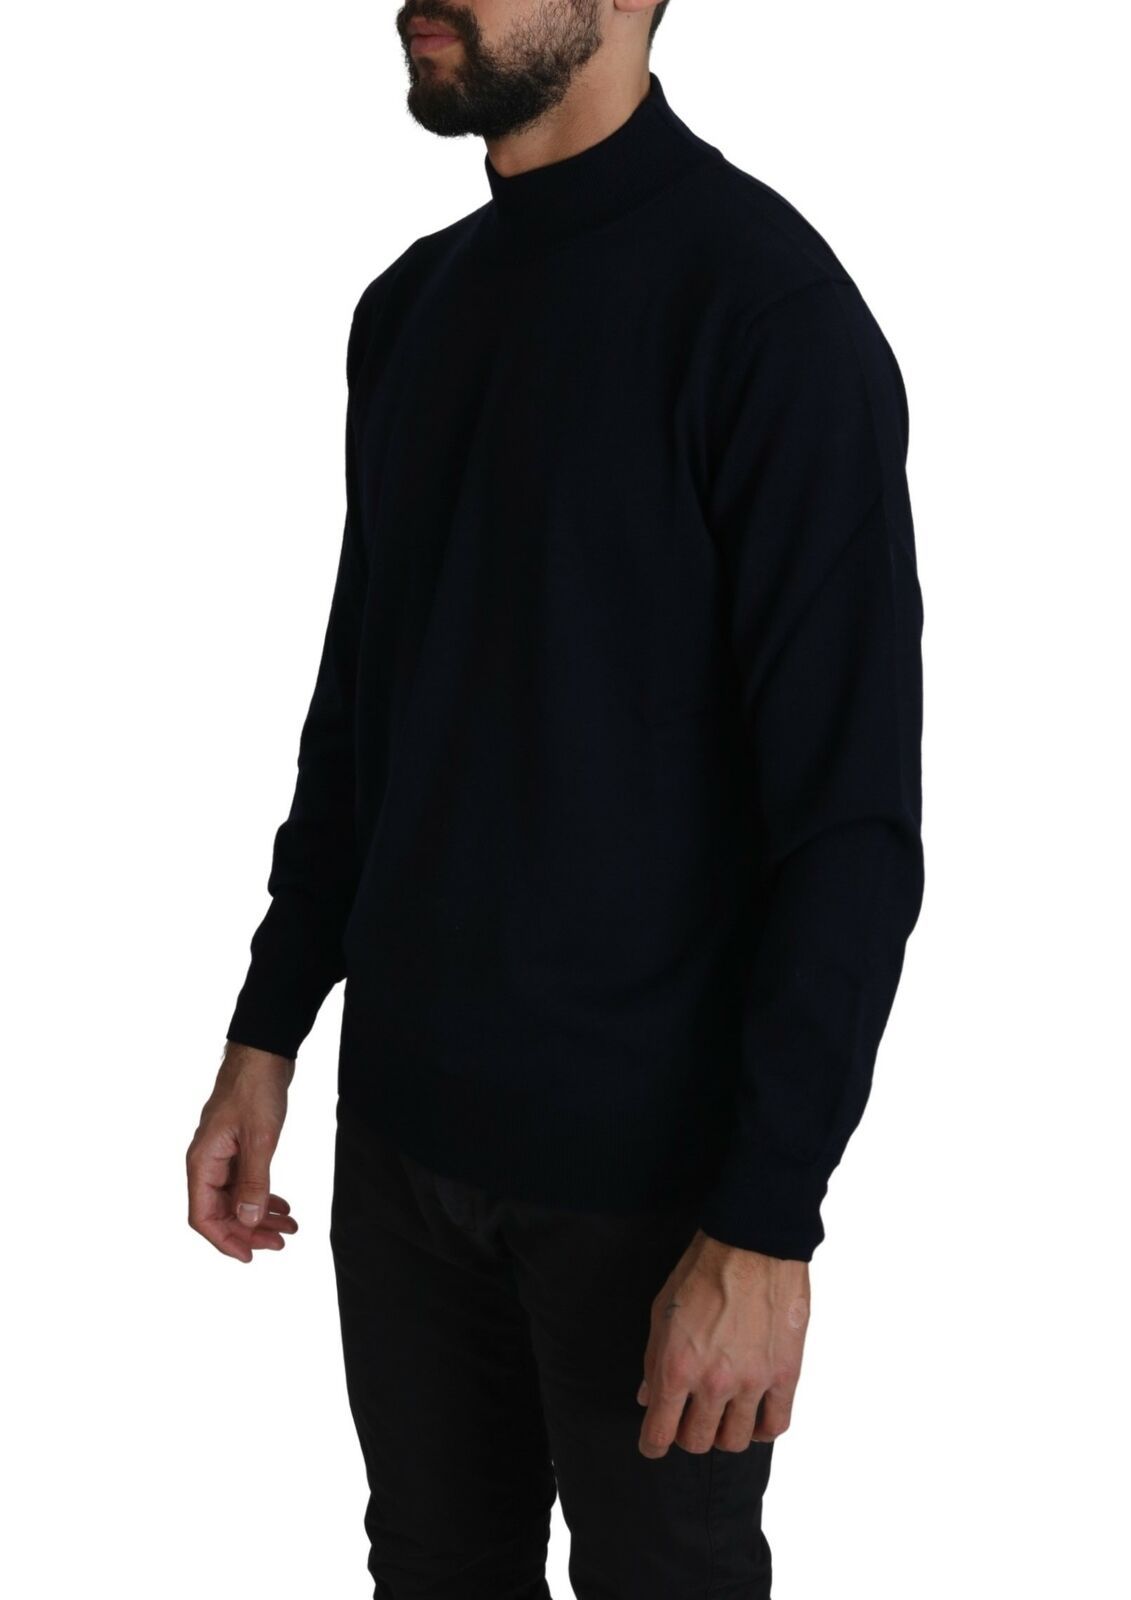 Dark Blue Crewneck Pullover 100% Wool Sweater - Designed by MILA SCHÖN Available to Buy at a Discounted Price on Moon Behind The Hill Online Designer Discount Store